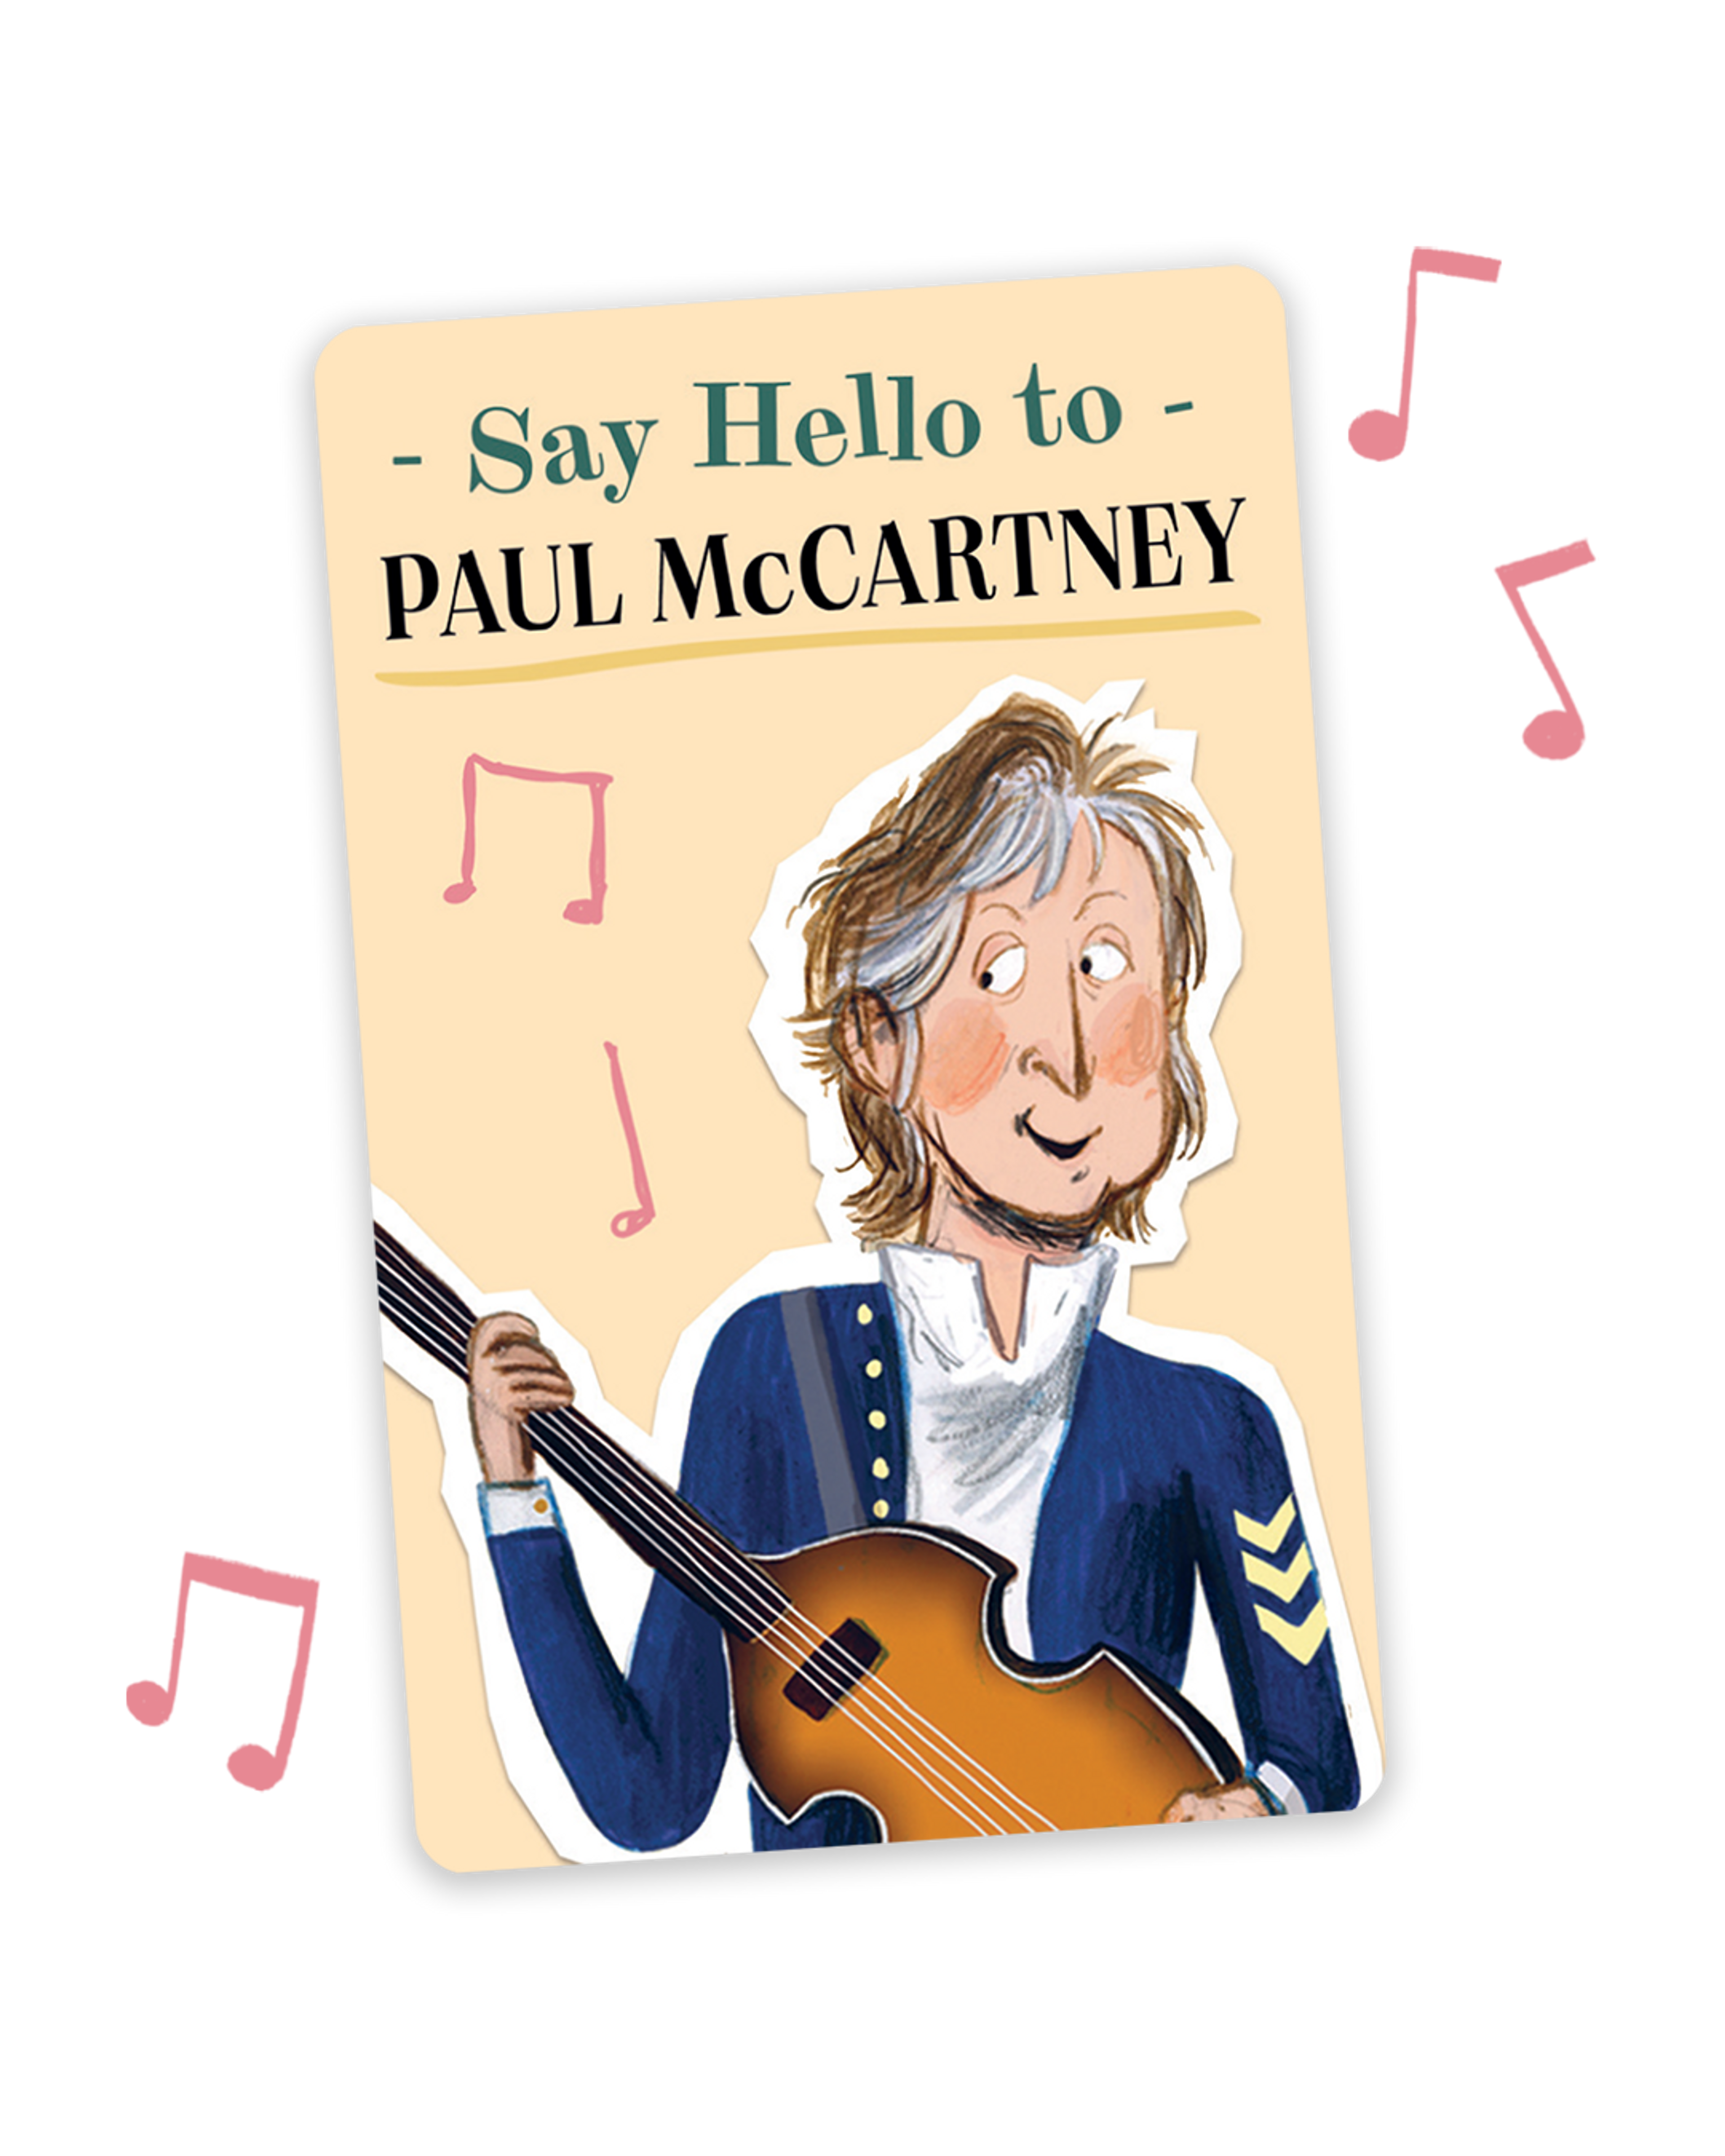 Image of the 'Say hello to Paul McCartney' Yoto card